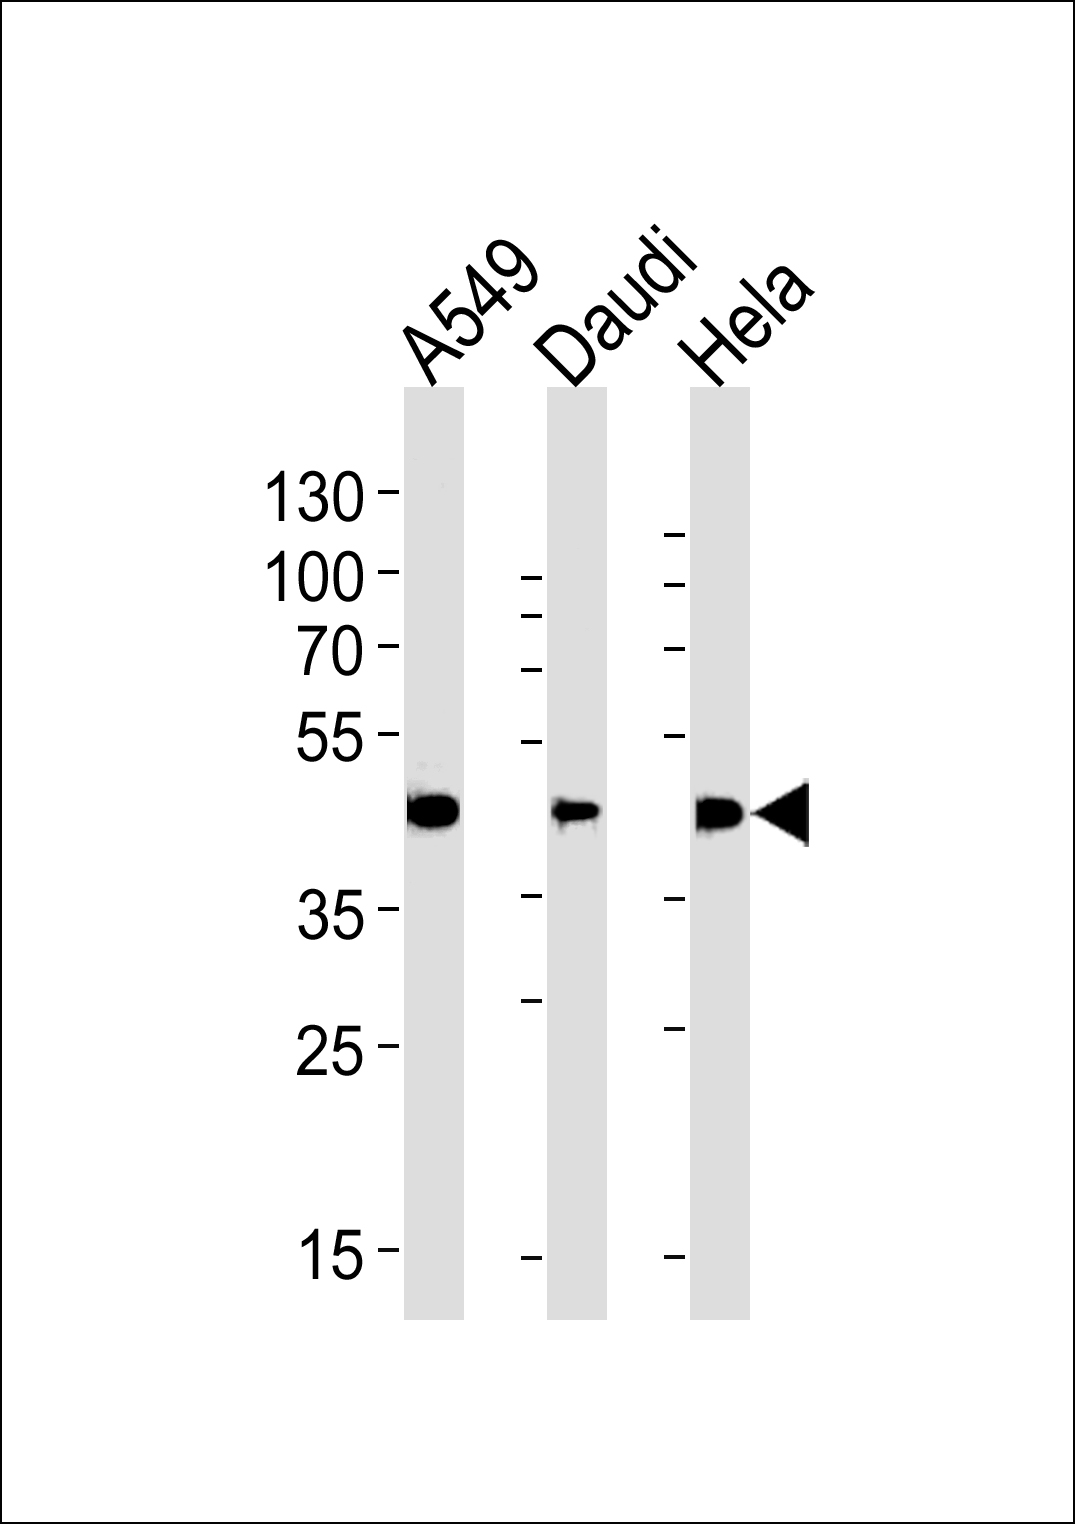 ALDH3A1 Antibody (Center) (Cat.# AP7849c) western blot analysis in A549,Daudi,Hela cell line lysates (35ug/lane).This demonstrates the ALDH3A1 antibody detected the ALDH3A1 protein (arrow).